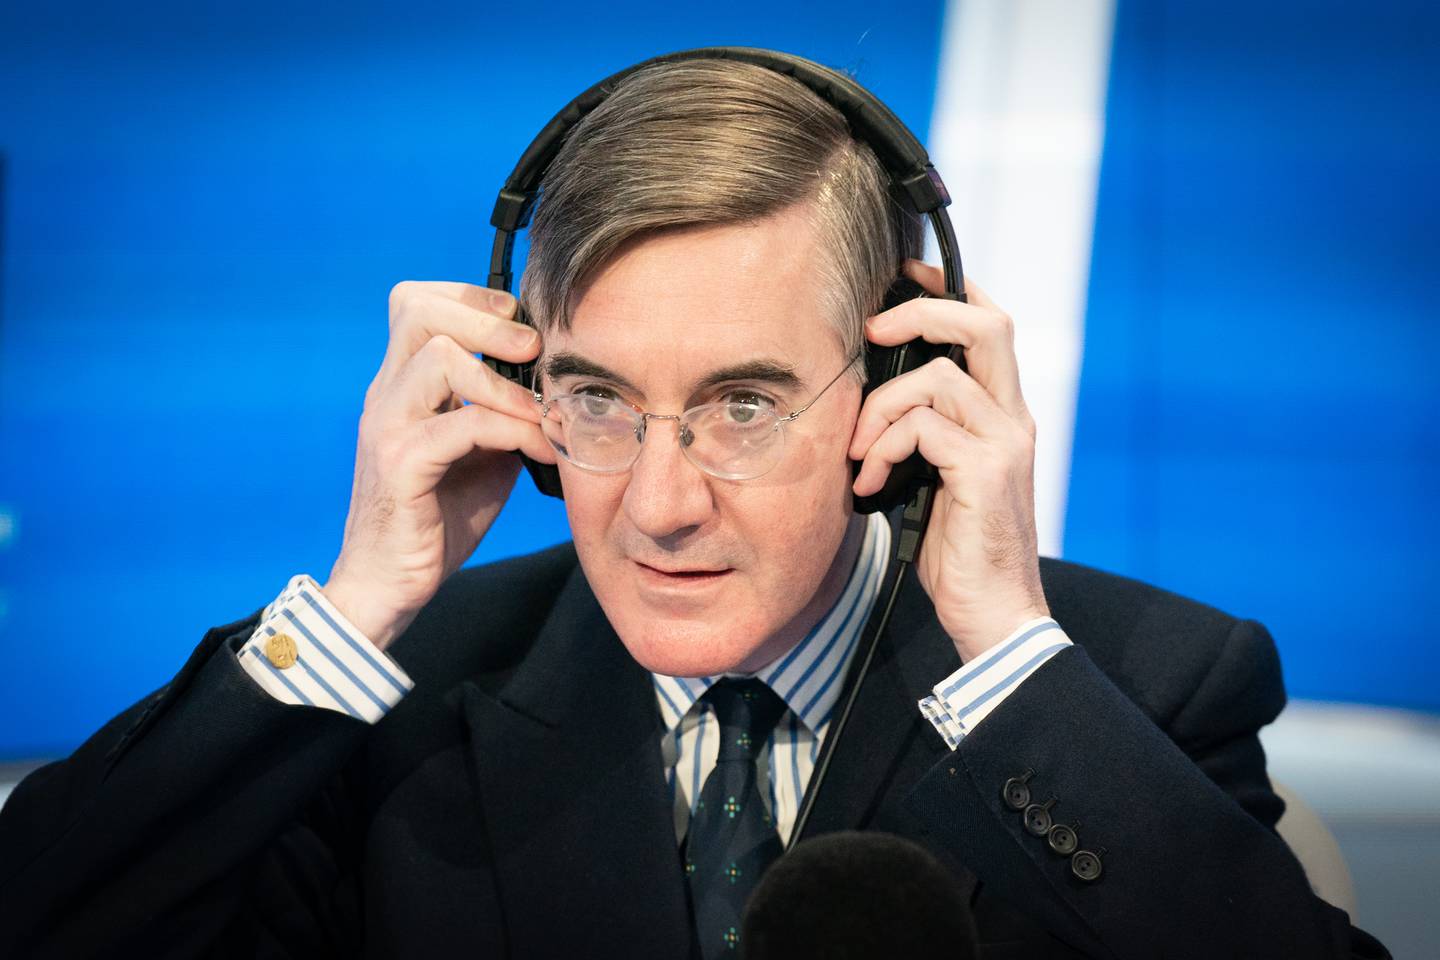 Minister for Brexit Opportunities and Government Efficiency in the Cabinet Office Jacob Rees-Mogg was among those in Russia's latest UK parliament sanctions list. PA